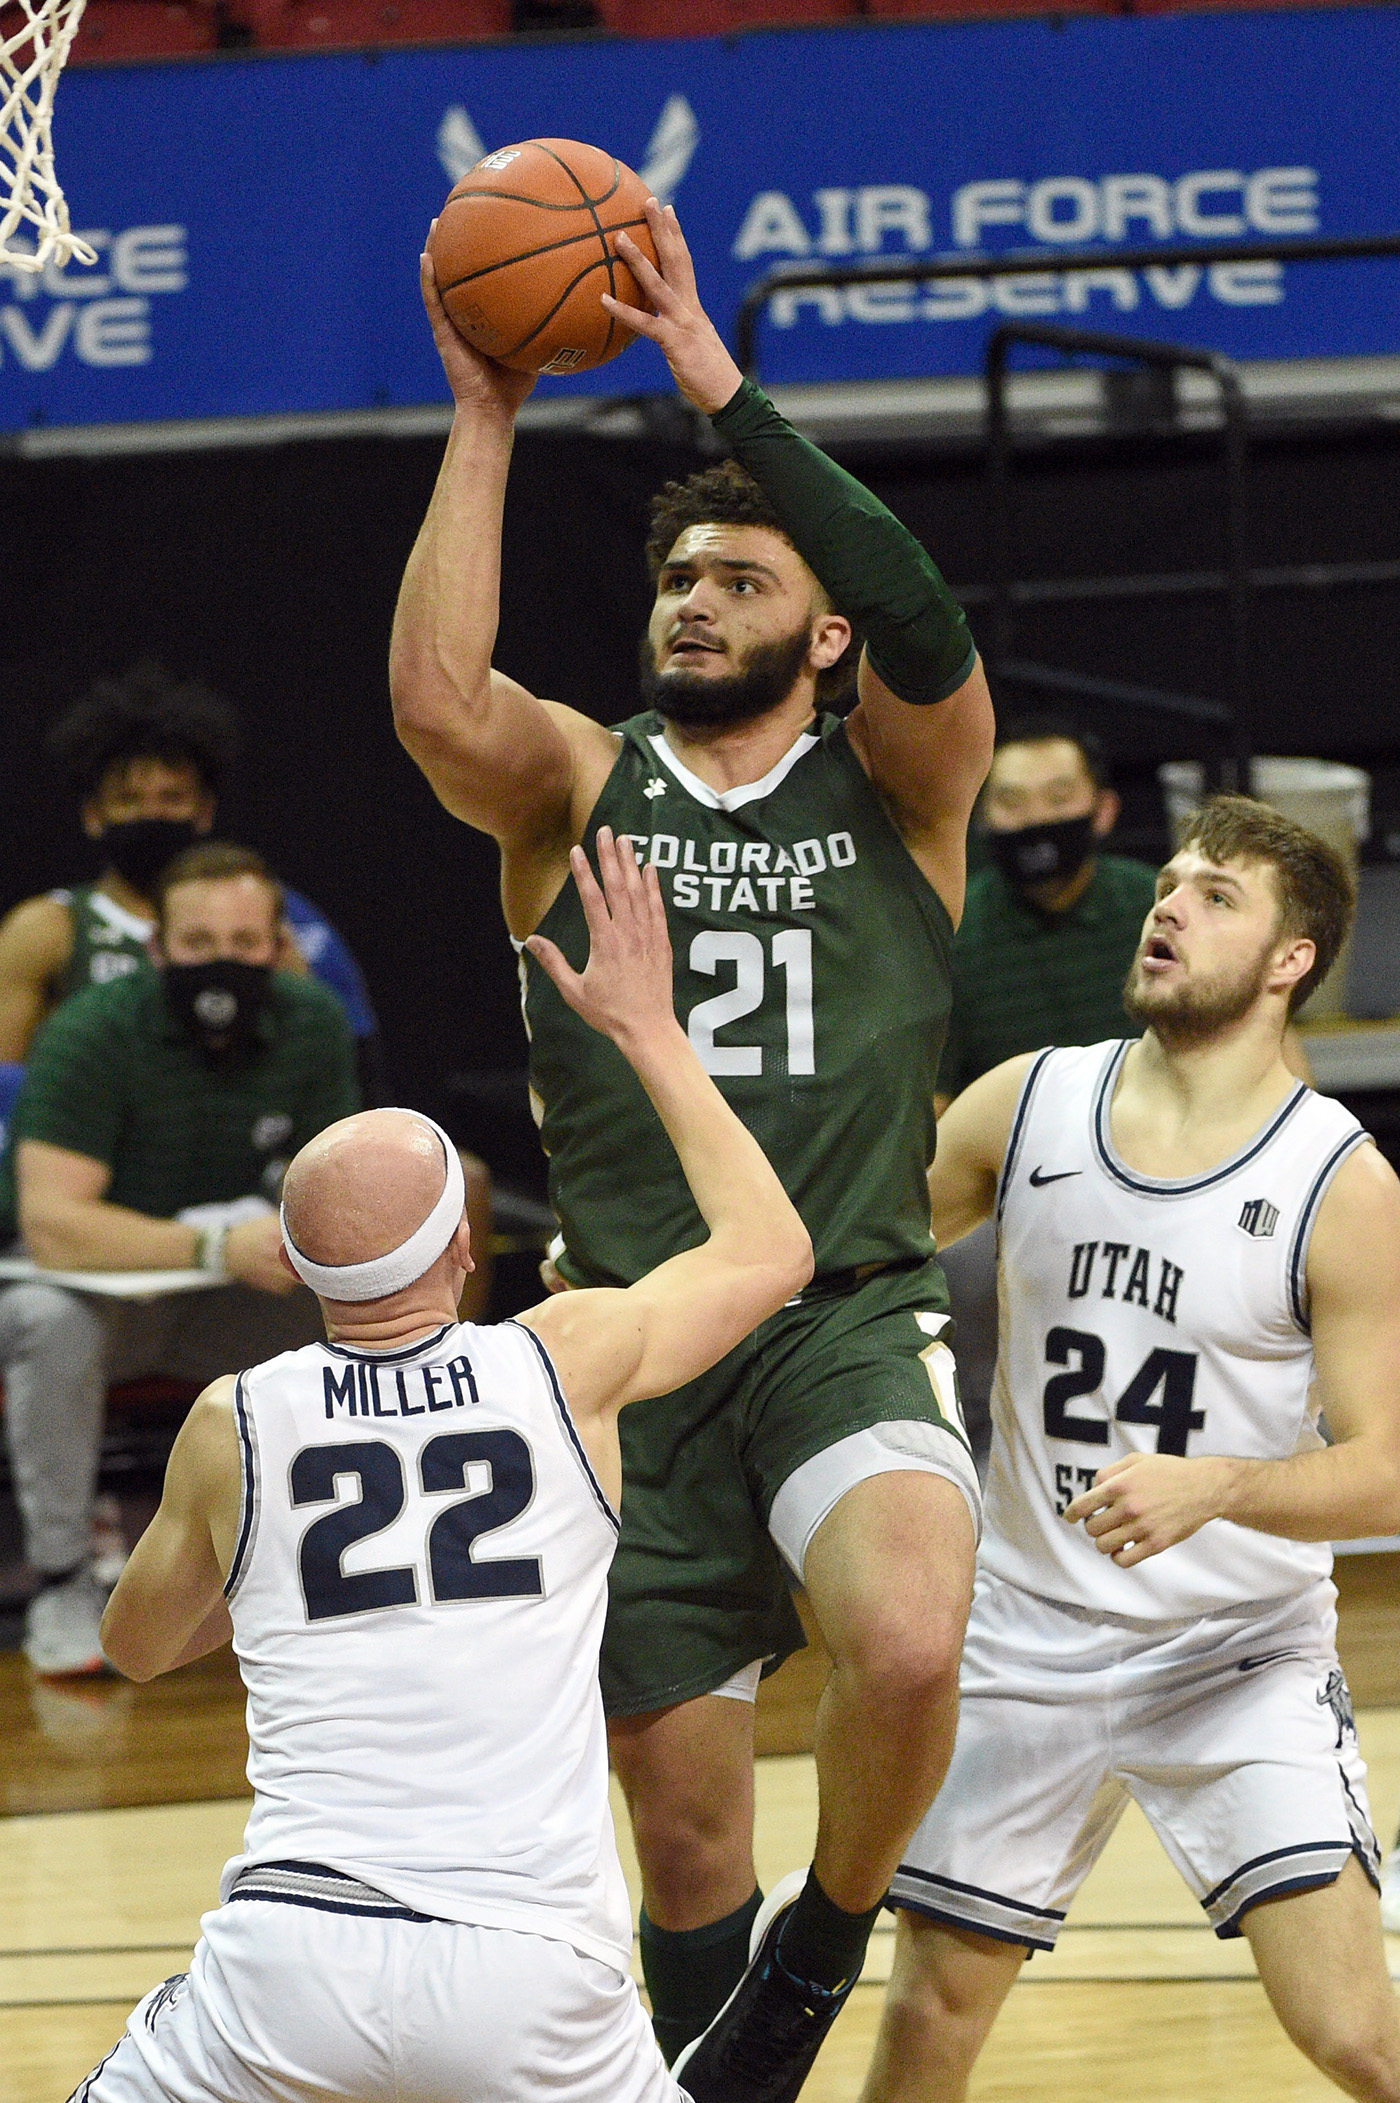 David Roddy of the Colorado State Rams shoots against the Utah State Aggies during the Mountain West Conference basketball tournament semifinals at the Thomas & Mack Center on March 12, 2021 in Las Vegas, Nevada. Utah State won 62-50.